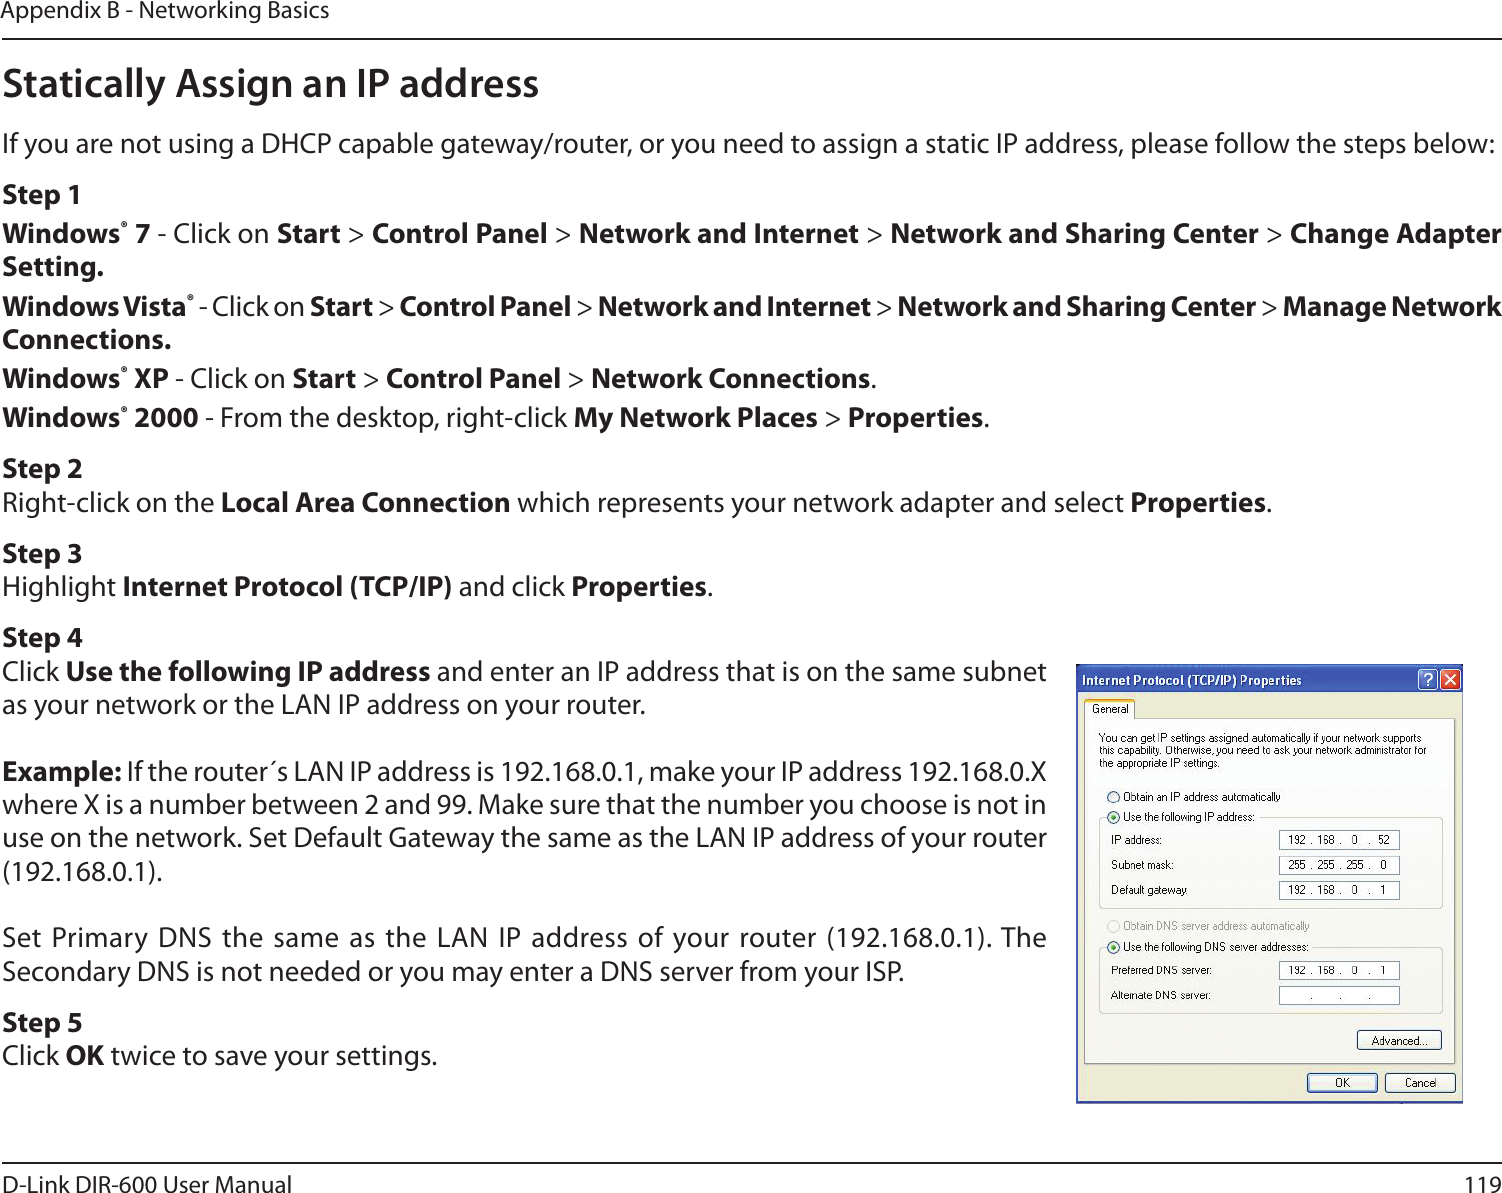 119D-Link DIR-600 User ManualAppendix B - Networking BasicsStatically Assign an IP addressIf you are not using a DHCP capable gateway/router, or you need to assign a static IP address, please follow the steps below:Step 1Windows® 7 - Click on Start &gt; Control Panel &gt; Network and Internet &gt; Network and Sharing Center &gt; Change Adapter Setting. Windows Vista® - Click on Start &gt; Control Panel &gt; Network and Internet &gt; Network and Sharing Center &gt; Manage Network Connections.Windows® XP - Click on Start &gt; Control Panel &gt; Network Connections.Windows® 2000 - From the desktop, right-click My Network Places &gt; Properties.Step 2Right-click on the Local Area Connection which represents your network adapter and select Properties.Step 3Highlight Internet Protocol (TCP/IP) and click Properties.Step 4Click Use the following IP address and enter an IP address that is on the same subnet as your network or the LAN IP address on your router.Example: If the router´s LAN IP address is 192.168.0.1, make your IP address 192.168.0.X where X is a number between 2 and 99. Make sure that the number you choose is not in use on the network. Set Default Gateway the same as the LAN IP address of your router (192.168.0.1). Set Primary DNS the  same as the LAN  IP address of your router (192.168.0.1). The Secondary DNS is not needed or you may enter a DNS server from your ISP.Step 5Click OK twice to save your settings.